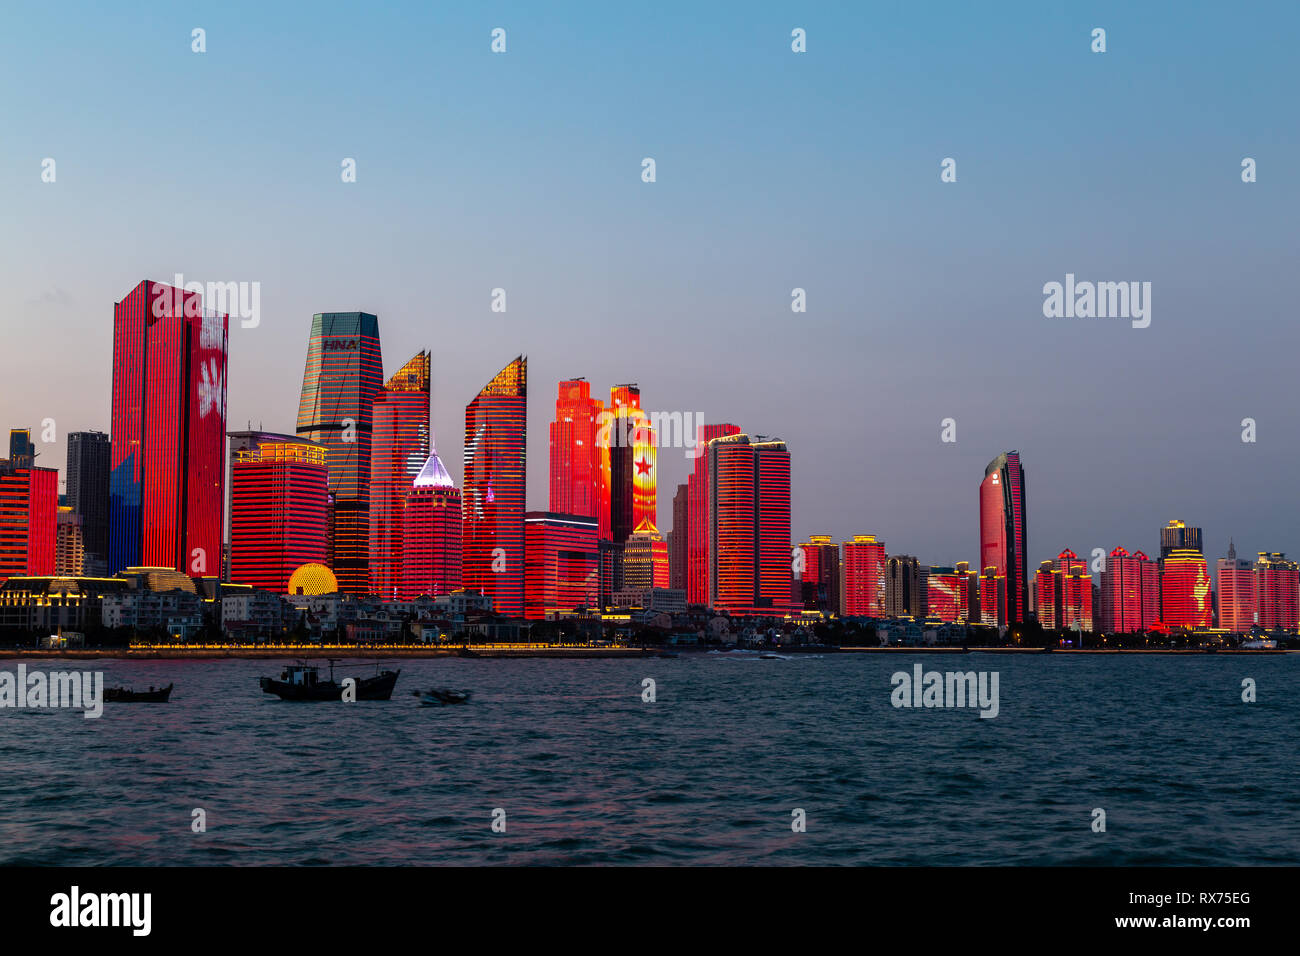 July 2018 - Qingdao, China - The new lightshow of Qingdao skyline created for the SCO summit between China and Russia of June 2018 seen from the Bathi Stock Photo